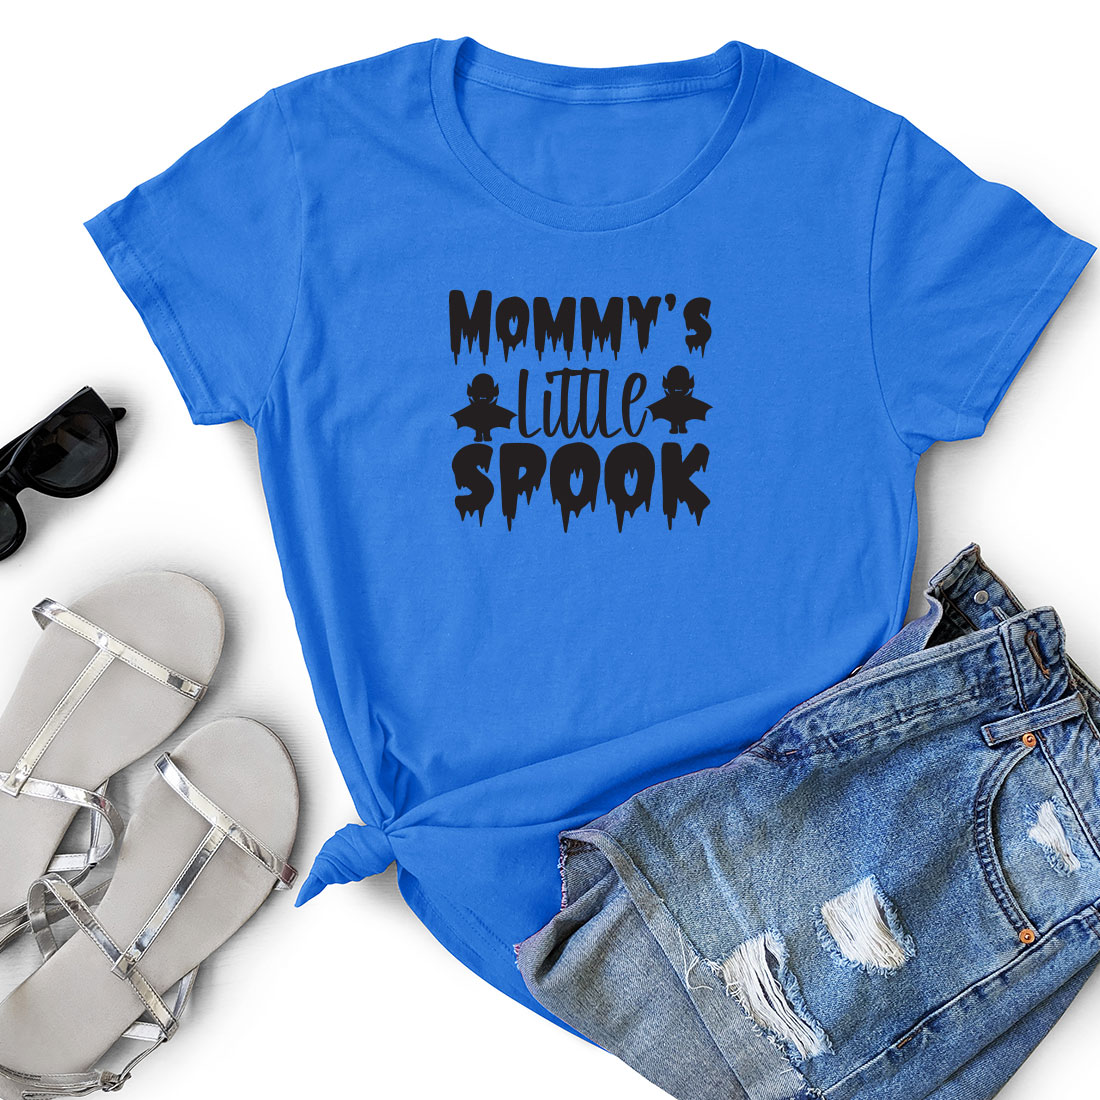 T - shirt that says mommy's little spook next to a pair.